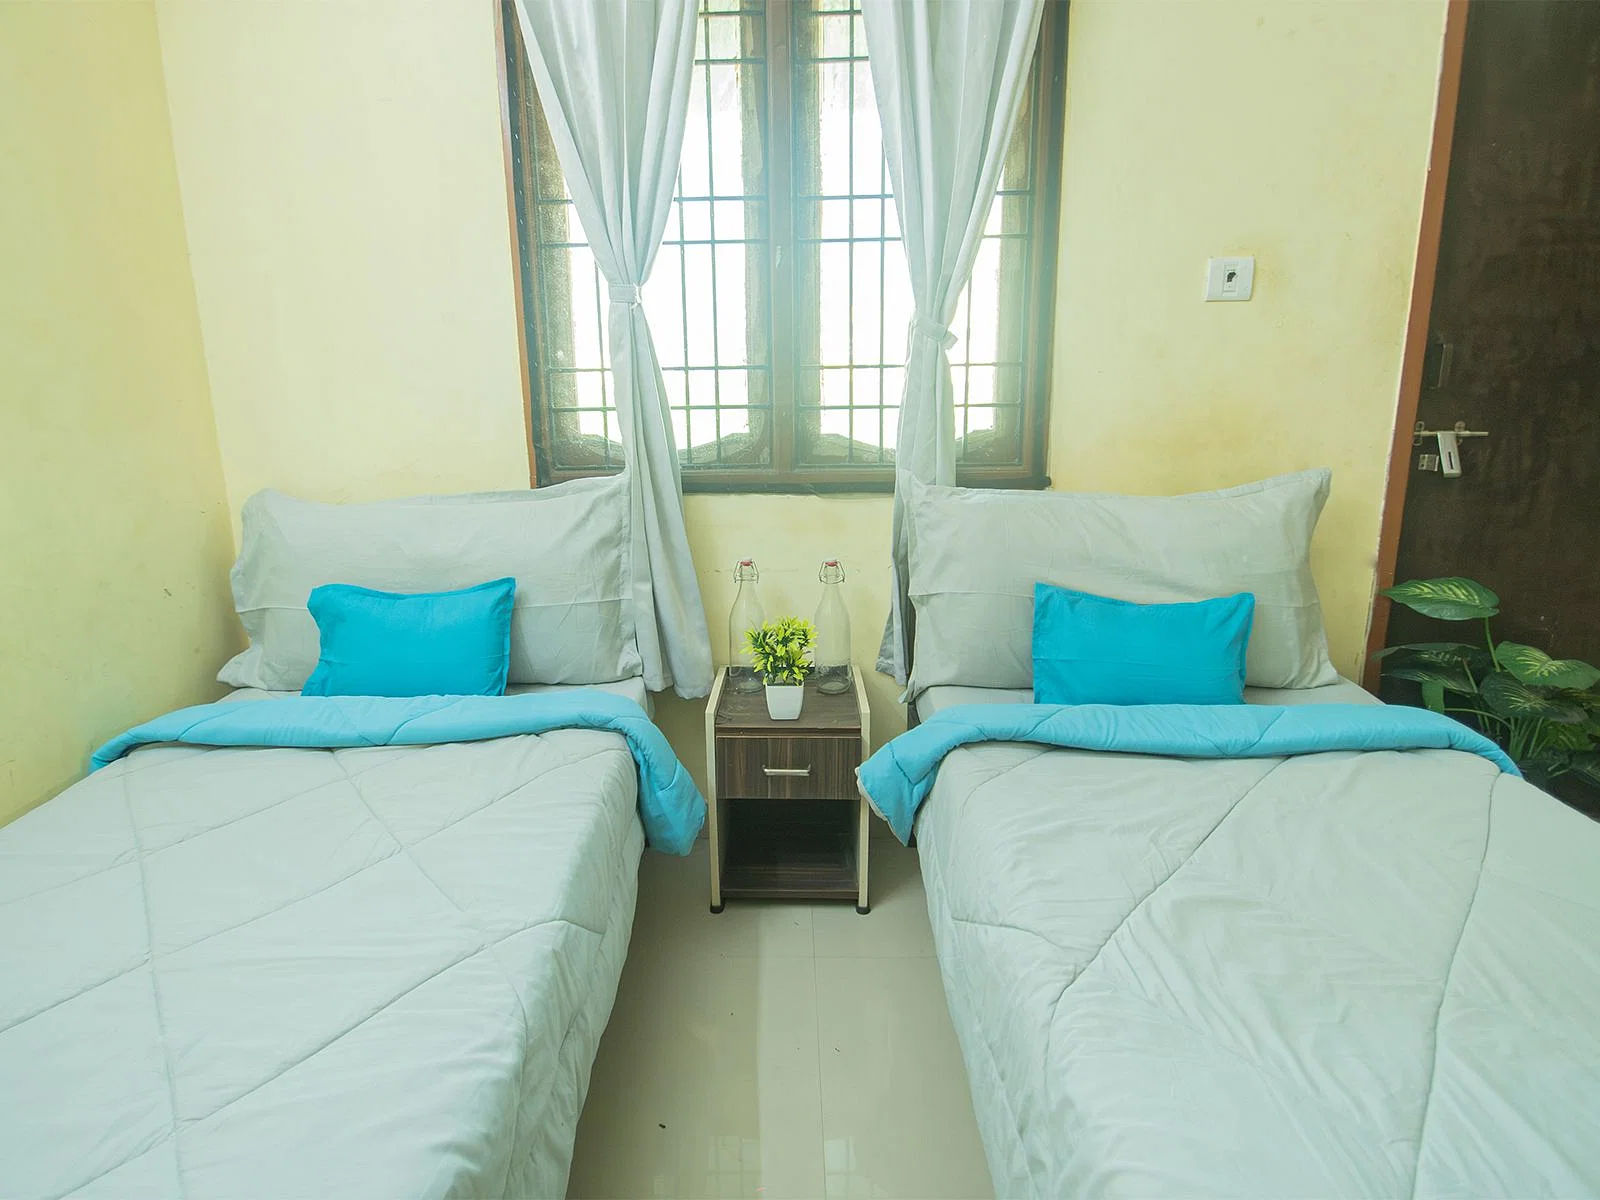 budget-friendly PGs and hostels for men with single rooms with daily hopusekeeping-Zolo Quintain